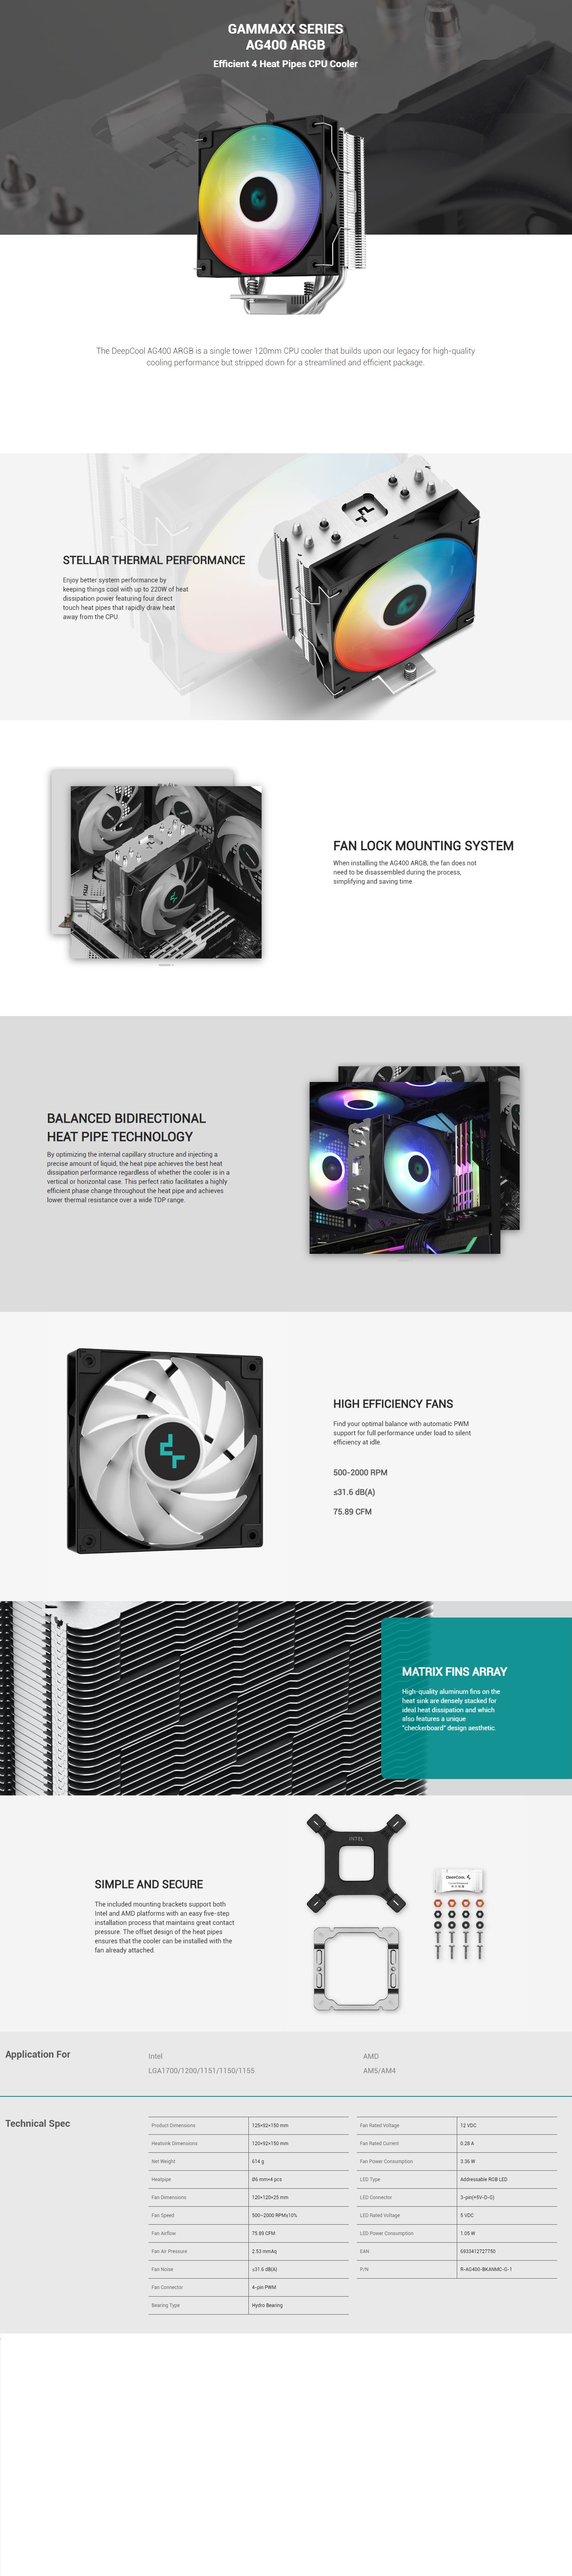 A large marketing image providing additional information about the product DeepCool AG400 ARGB CPU Cooler - Additional alt info not provided